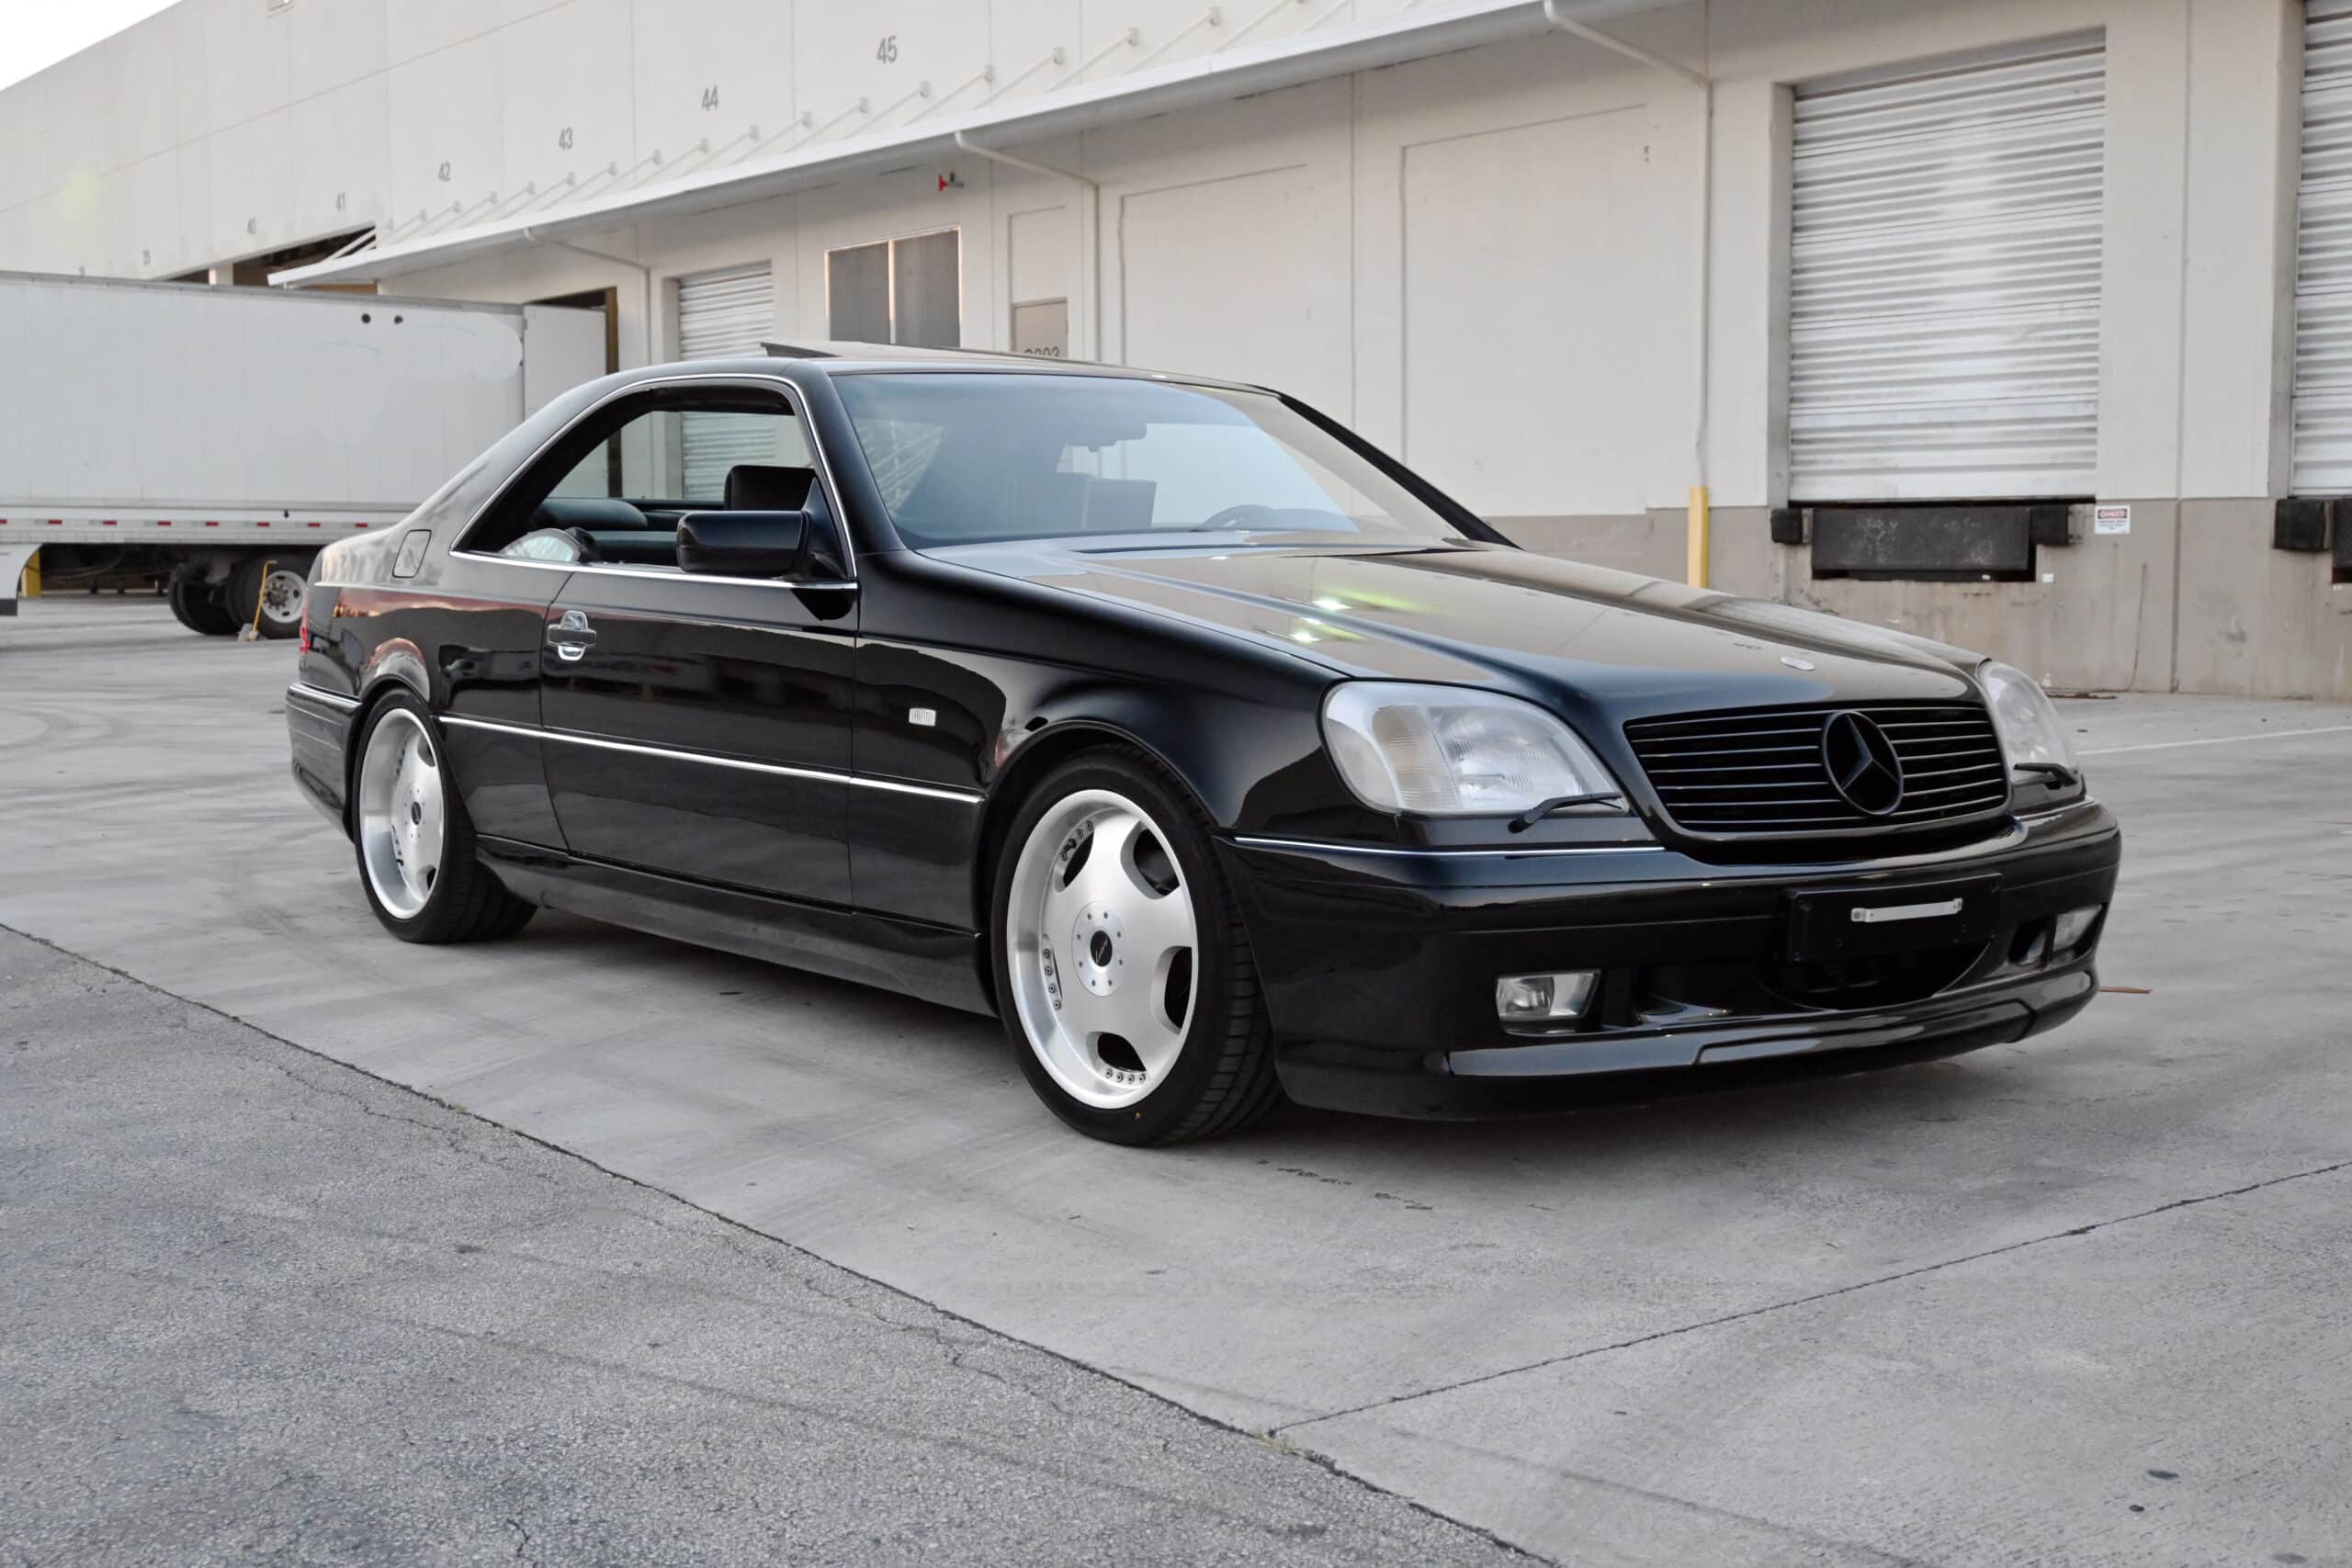 1995 Mercedes Benz S600 Coupe, Wald edition, one reported owner, 47K miles, just fully serviced, ice cold A/C, fast and luxurious, 5-speed Gtronic